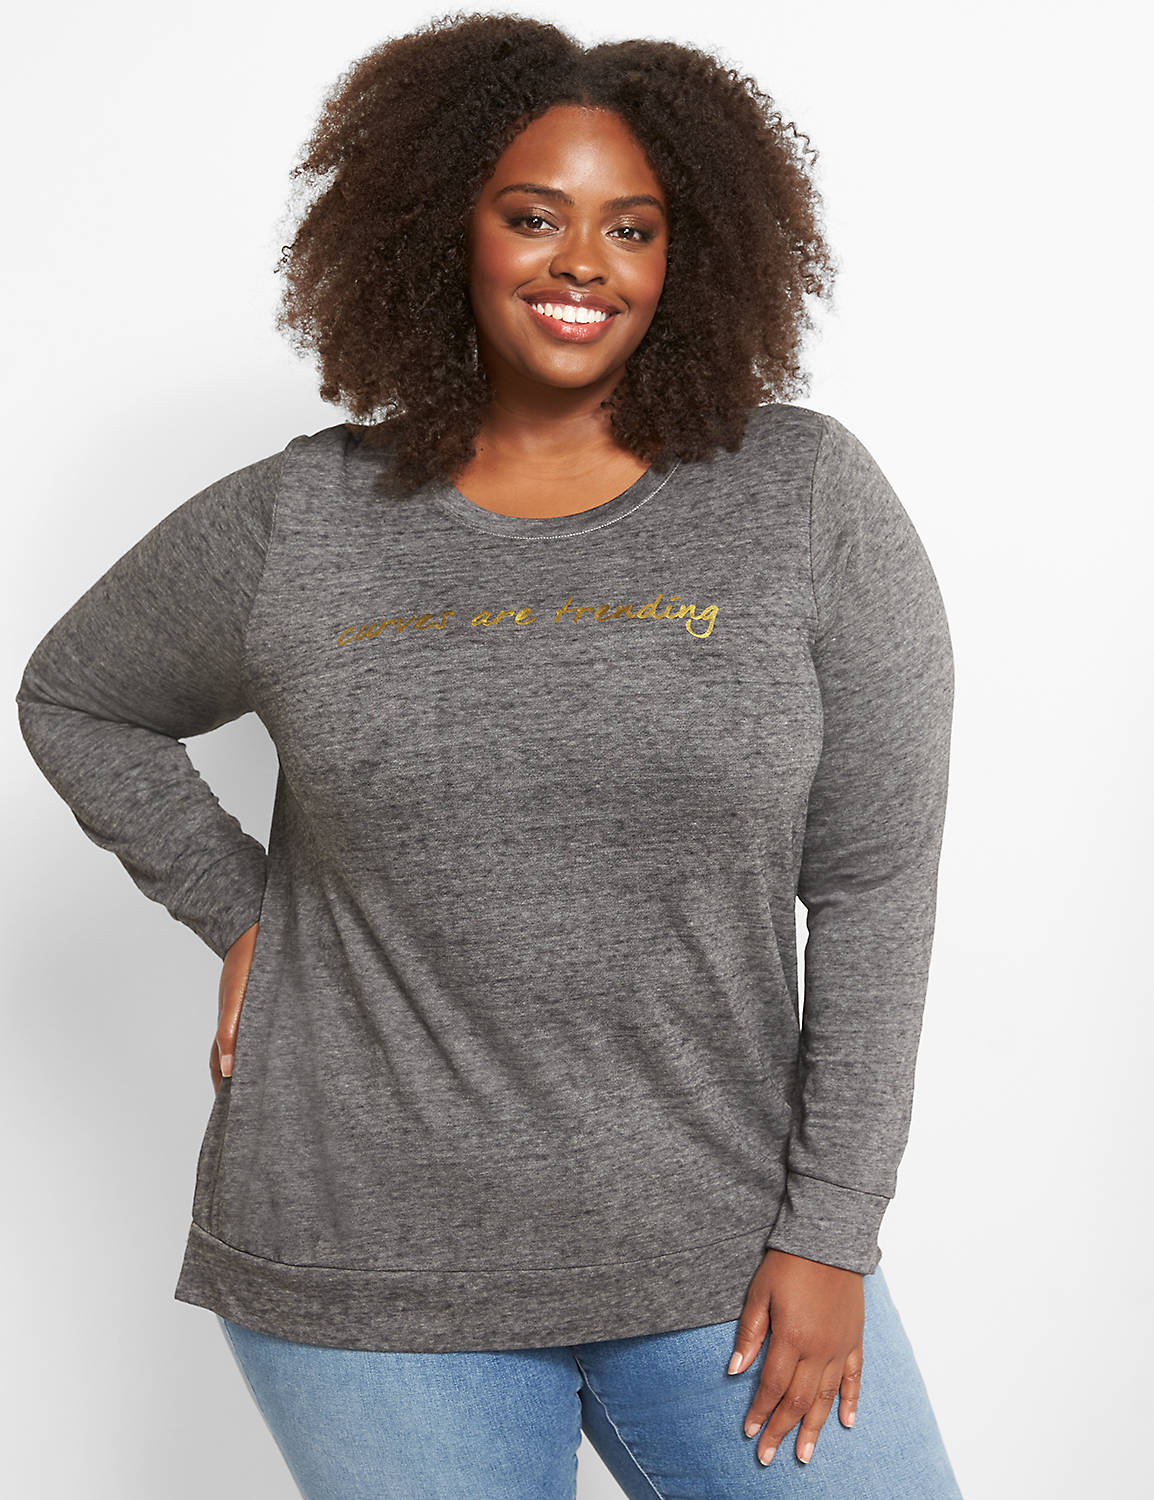 Long Sleeve Crew Neck Sweatshirt with Side Slit Graphic: Curves are Trending:Ascena Black:10/12 Product Image 1